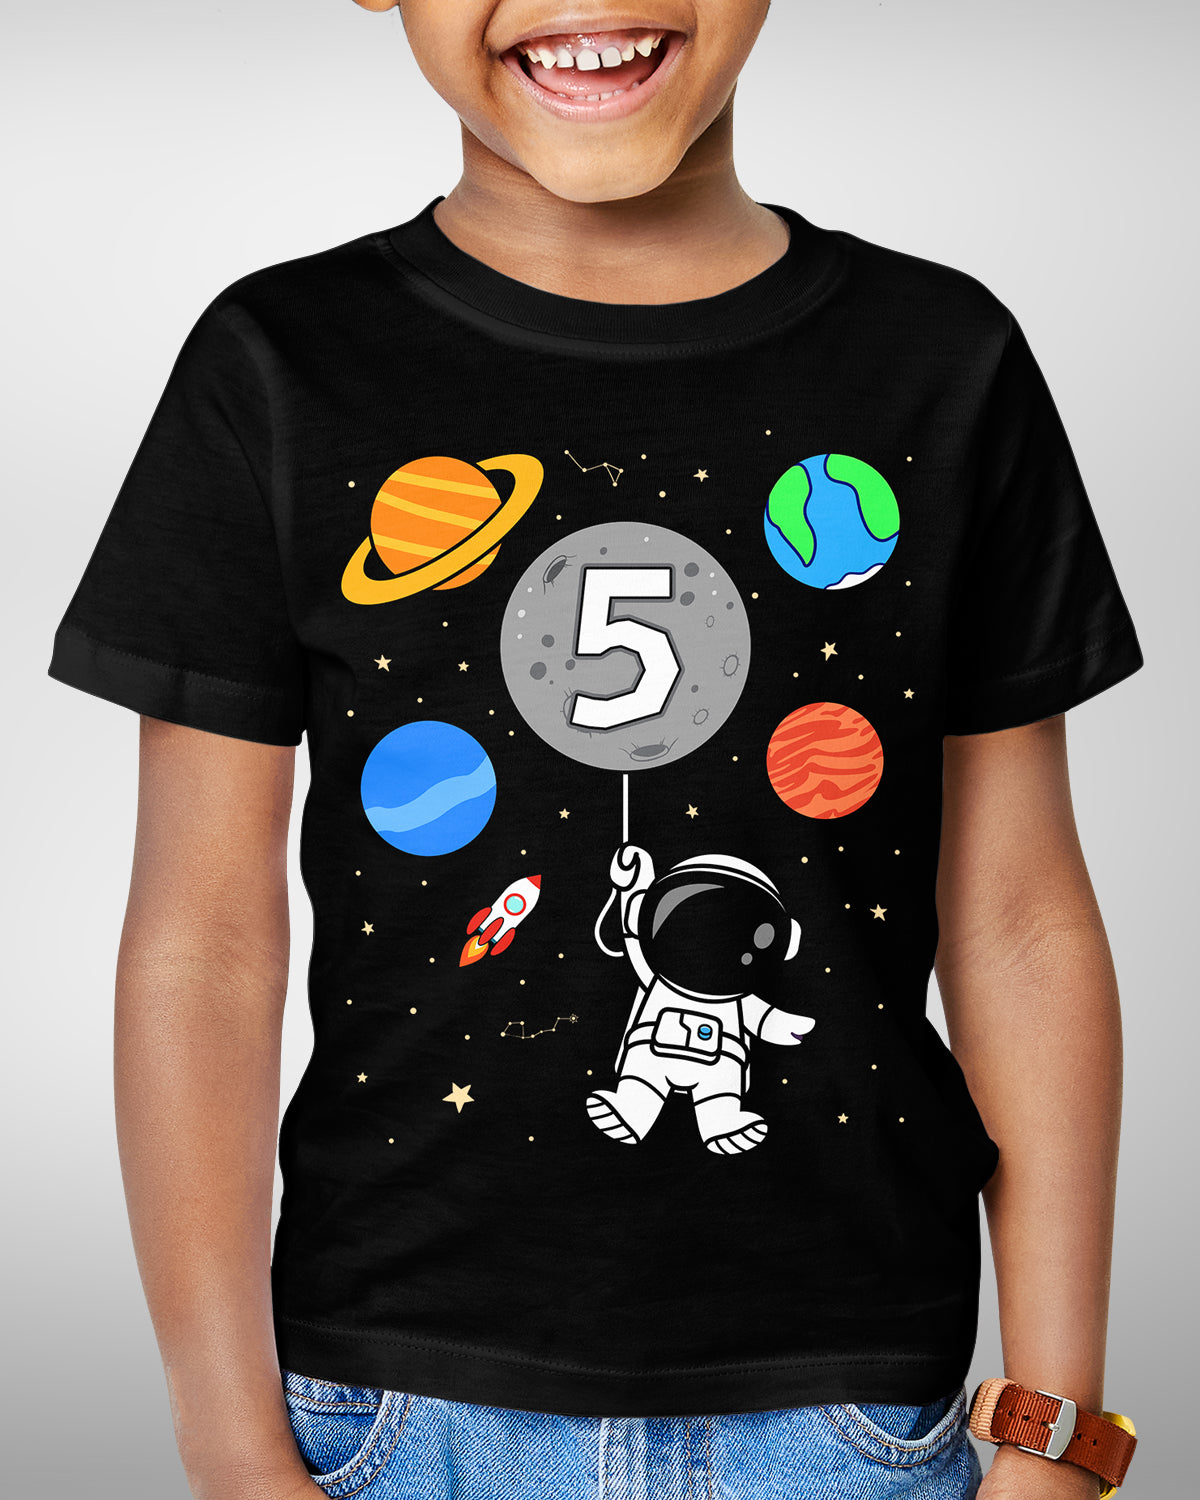 5th Birthday Astronaut Shirt - Outer Space Adventure - Personalized Toddler Tee